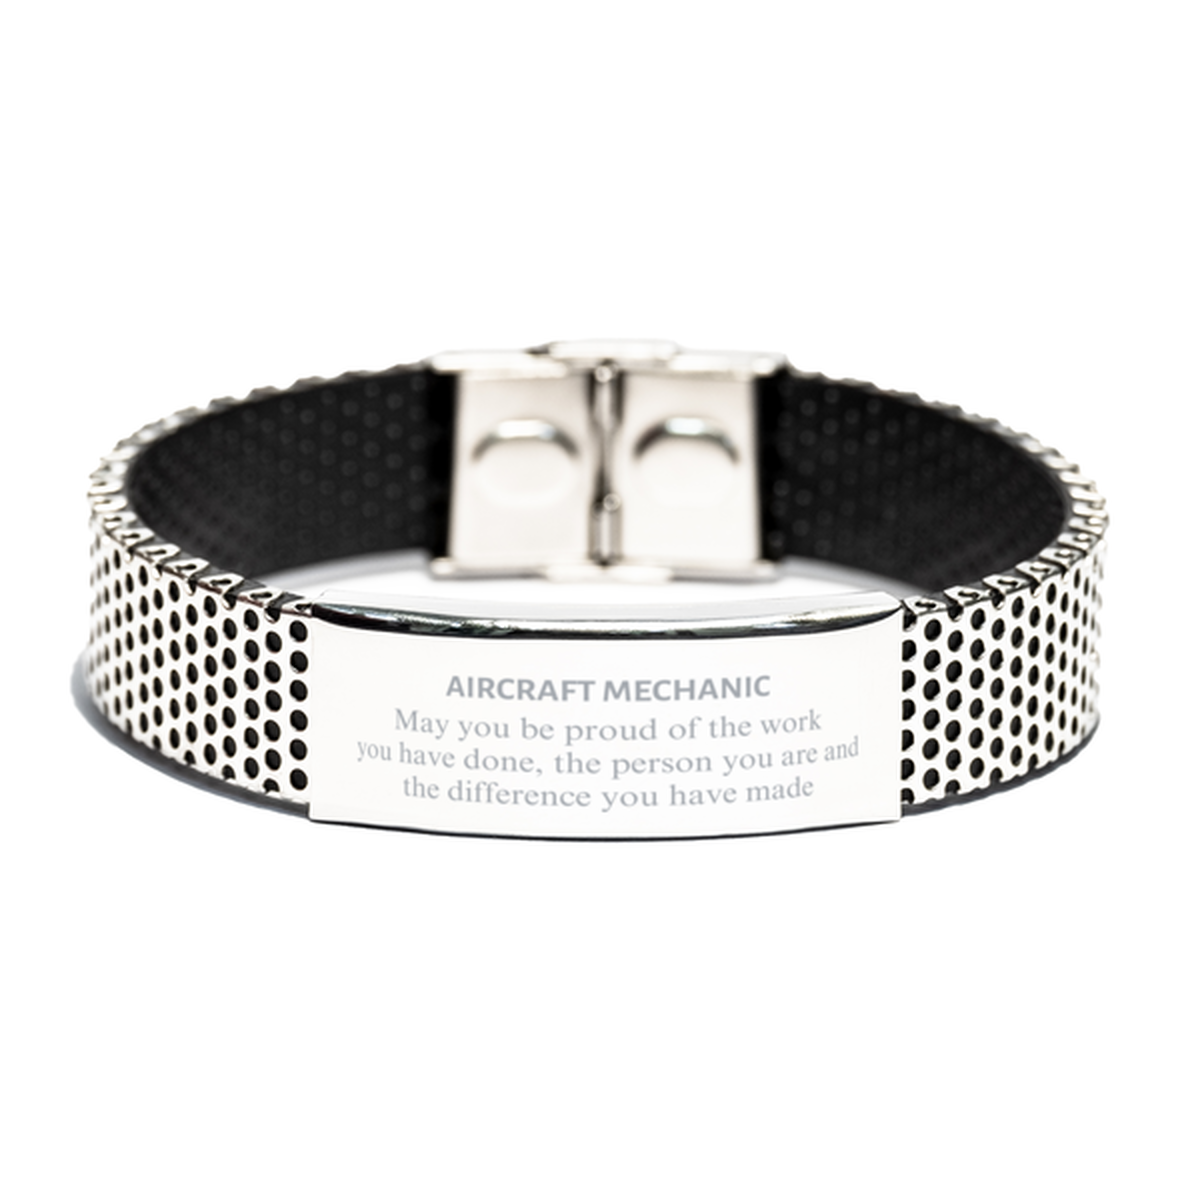 Aircraft Mechanic May you be proud of the work you have done, Retirement Aircraft Mechanic Stainless Steel Bracelet for Colleague Appreciation Gifts Amazing for Aircraft Mechanic